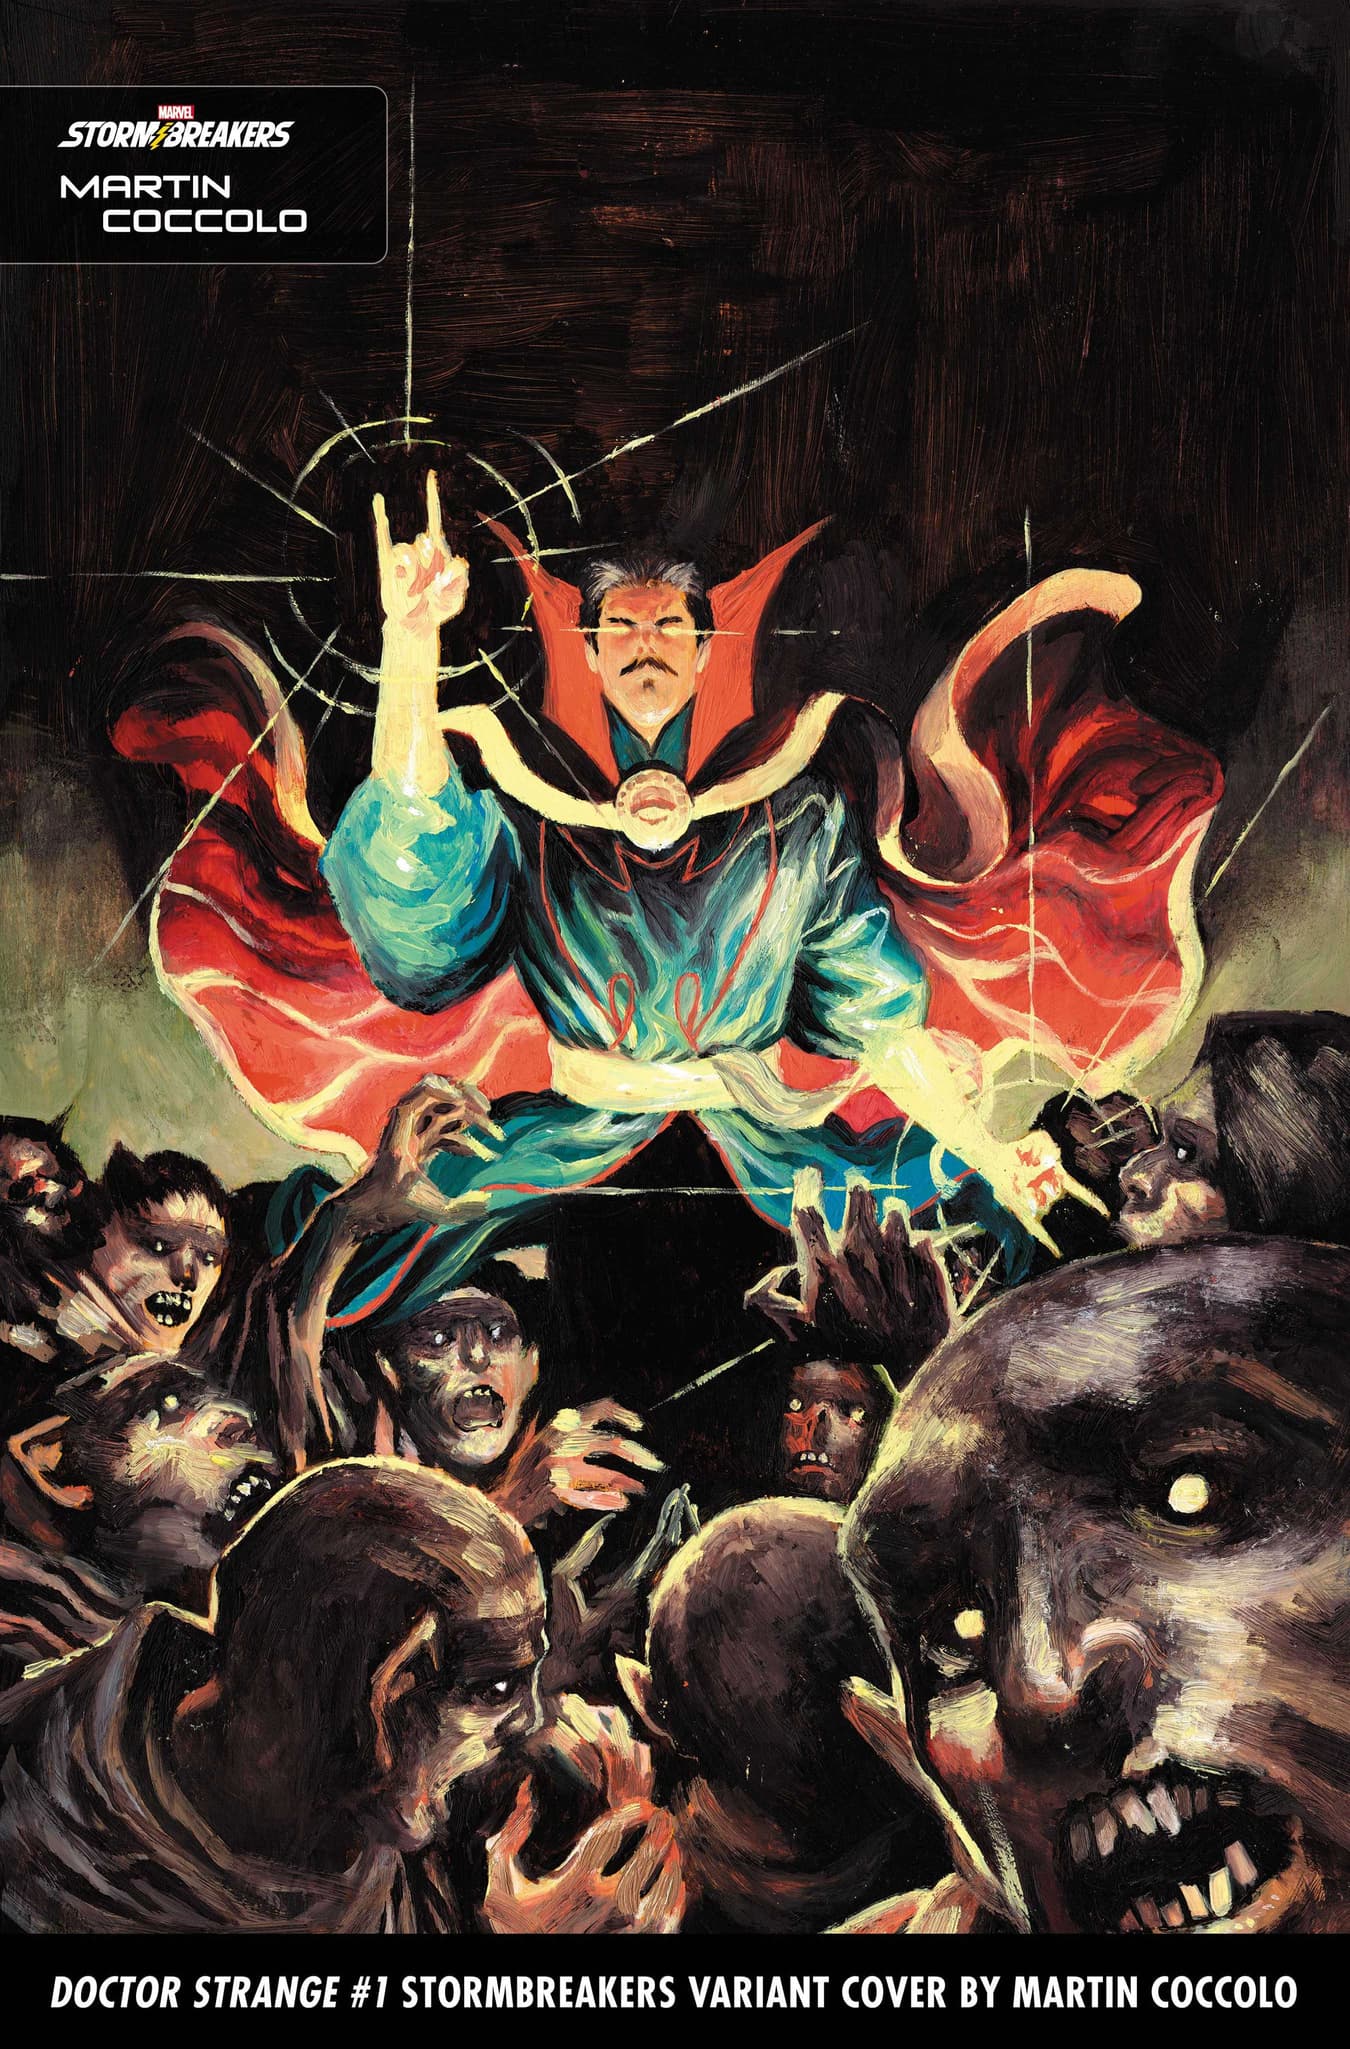 DOCTOR STRANGE #1 Stormbreakers Variant Cover by Martin Coccolo